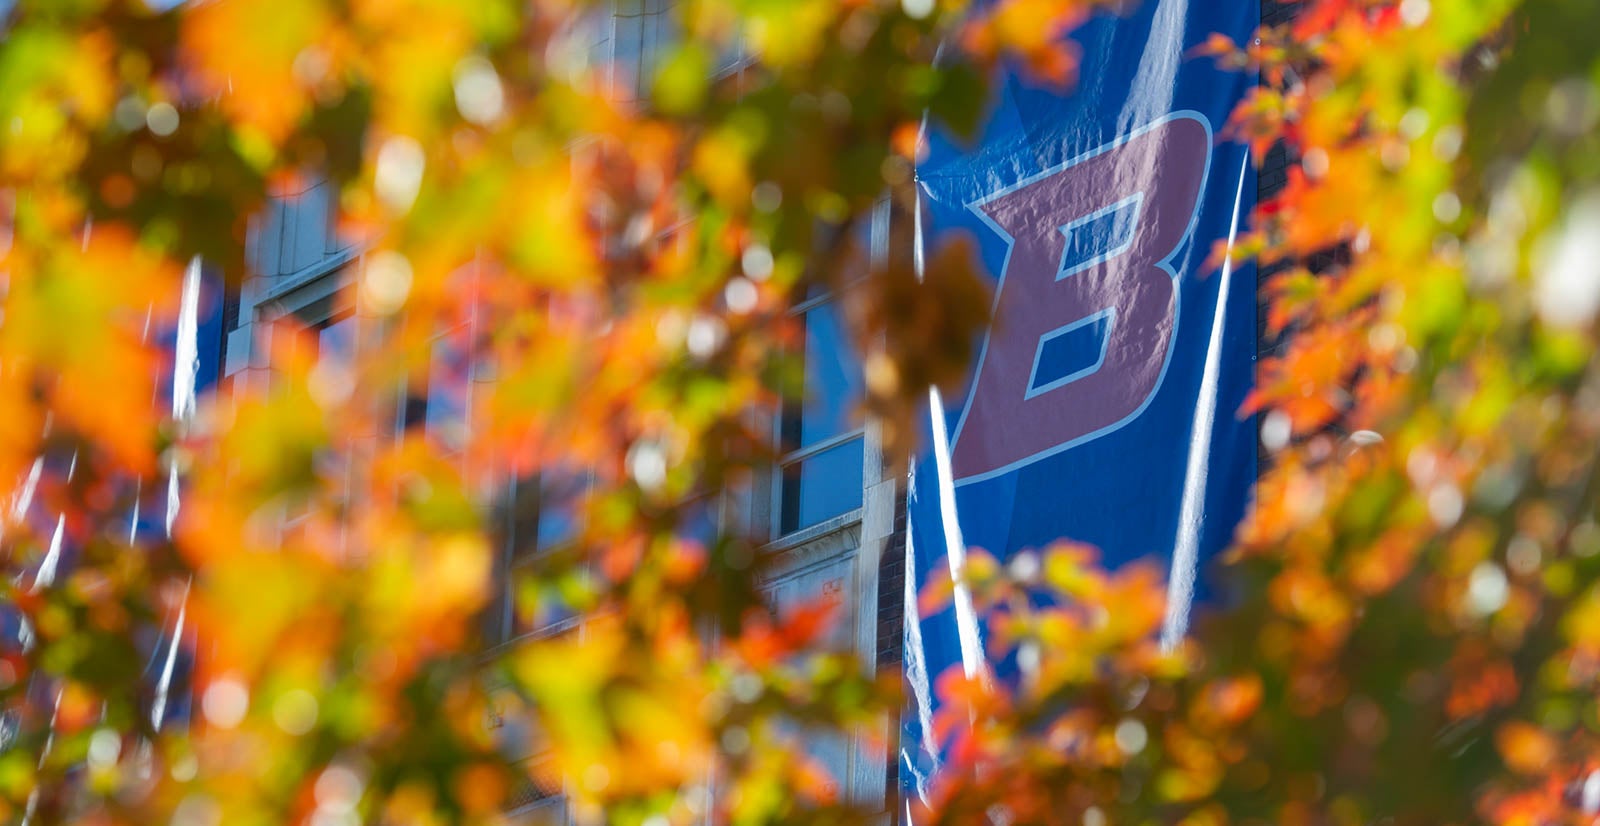 A photograph of a blue Boise State banner through the red, yellow and green leaves of a tree in autumn